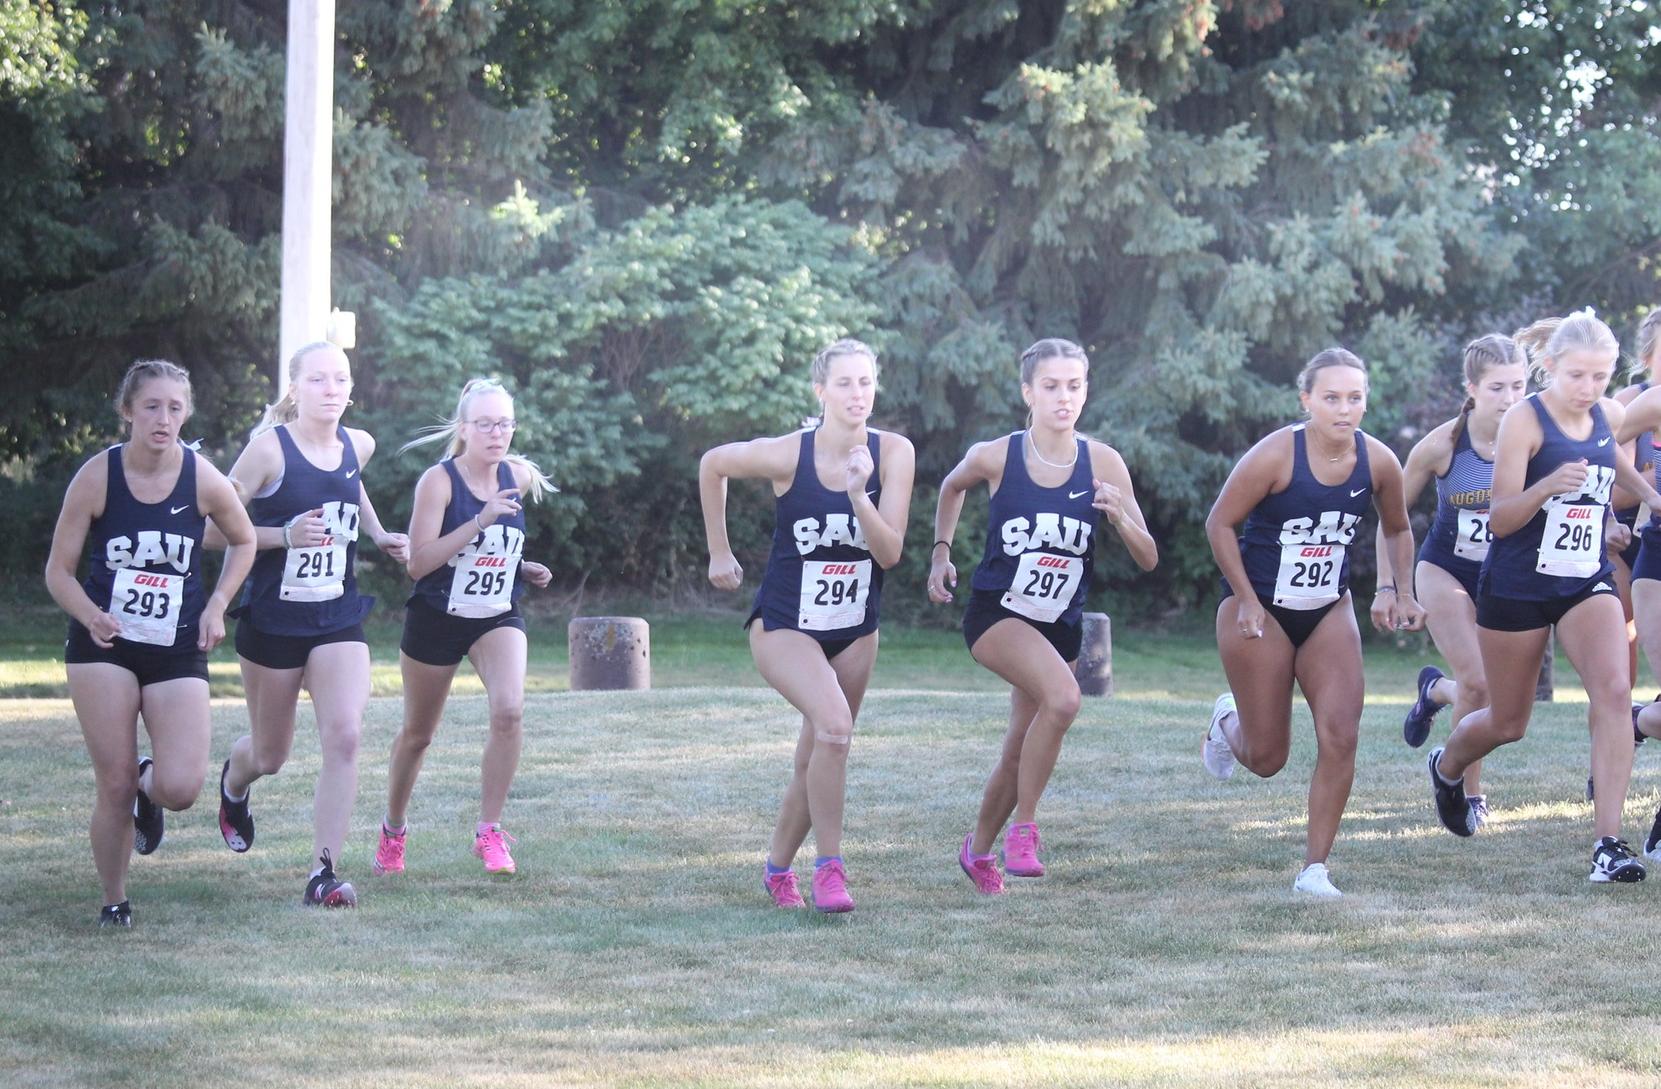 St. Ambrose opens cross country season at Emeis Park